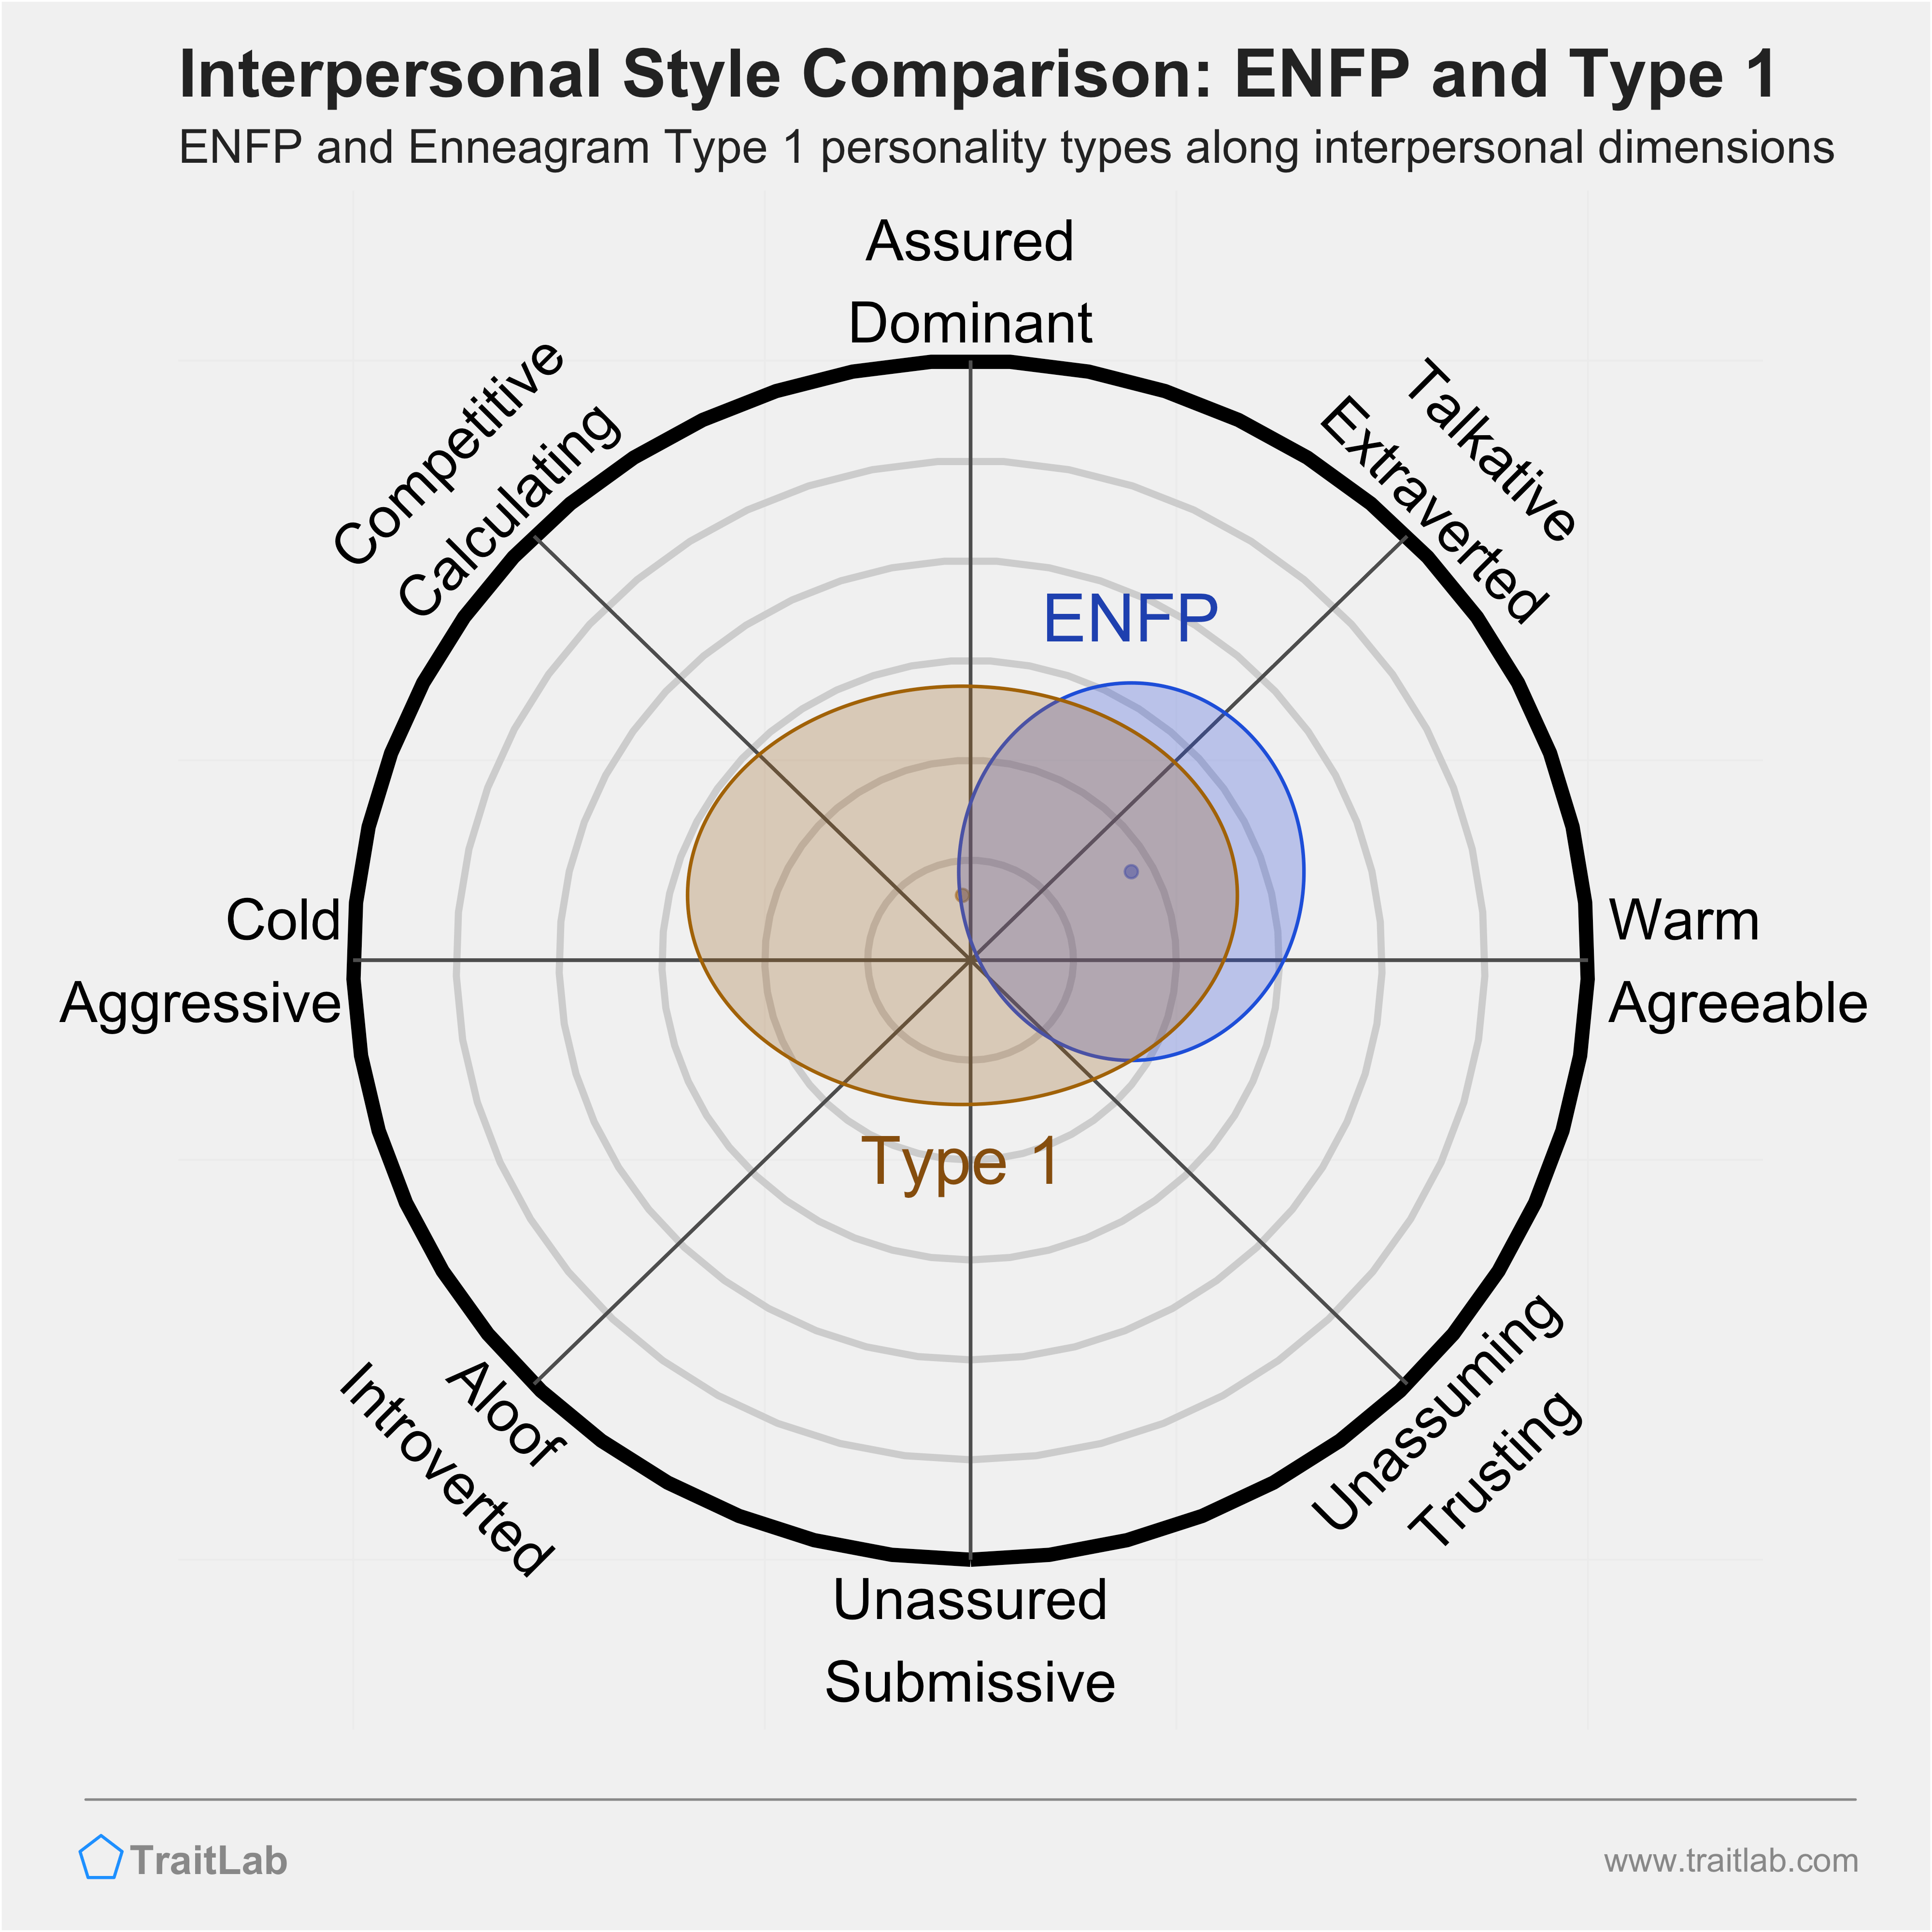 Enneagram ENFP and Type 1 comparison across interpersonal dimensions